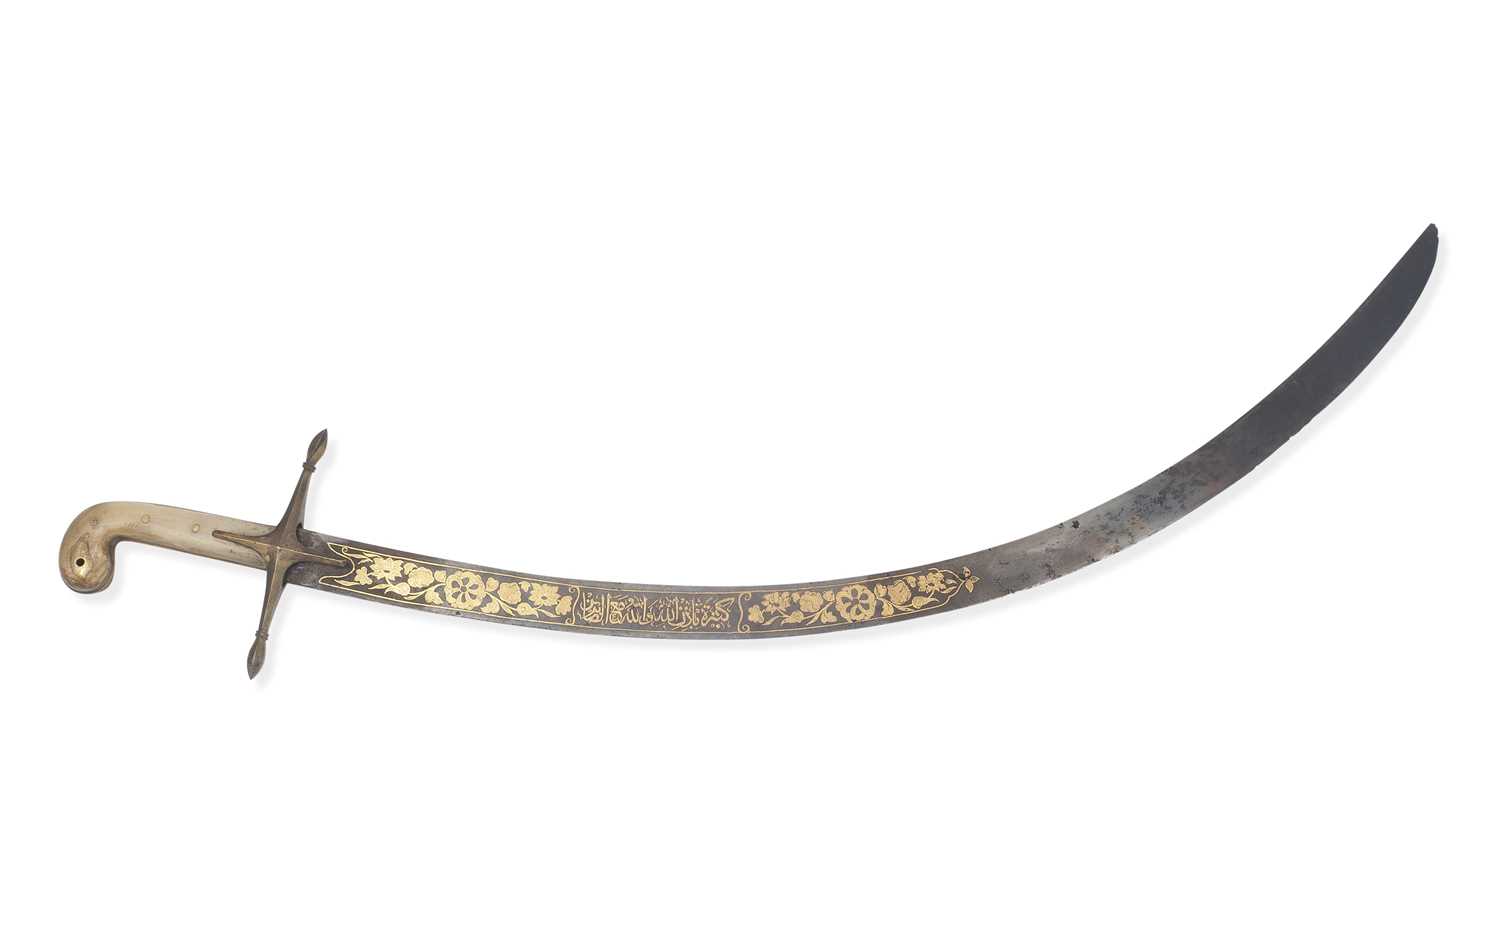 A LATE 18TH / EARLY 19TH CENTURY OTTOMAN (TURKEY) GOLD DAMASCENED SWORD (SHAMSHIR) - Image 2 of 5